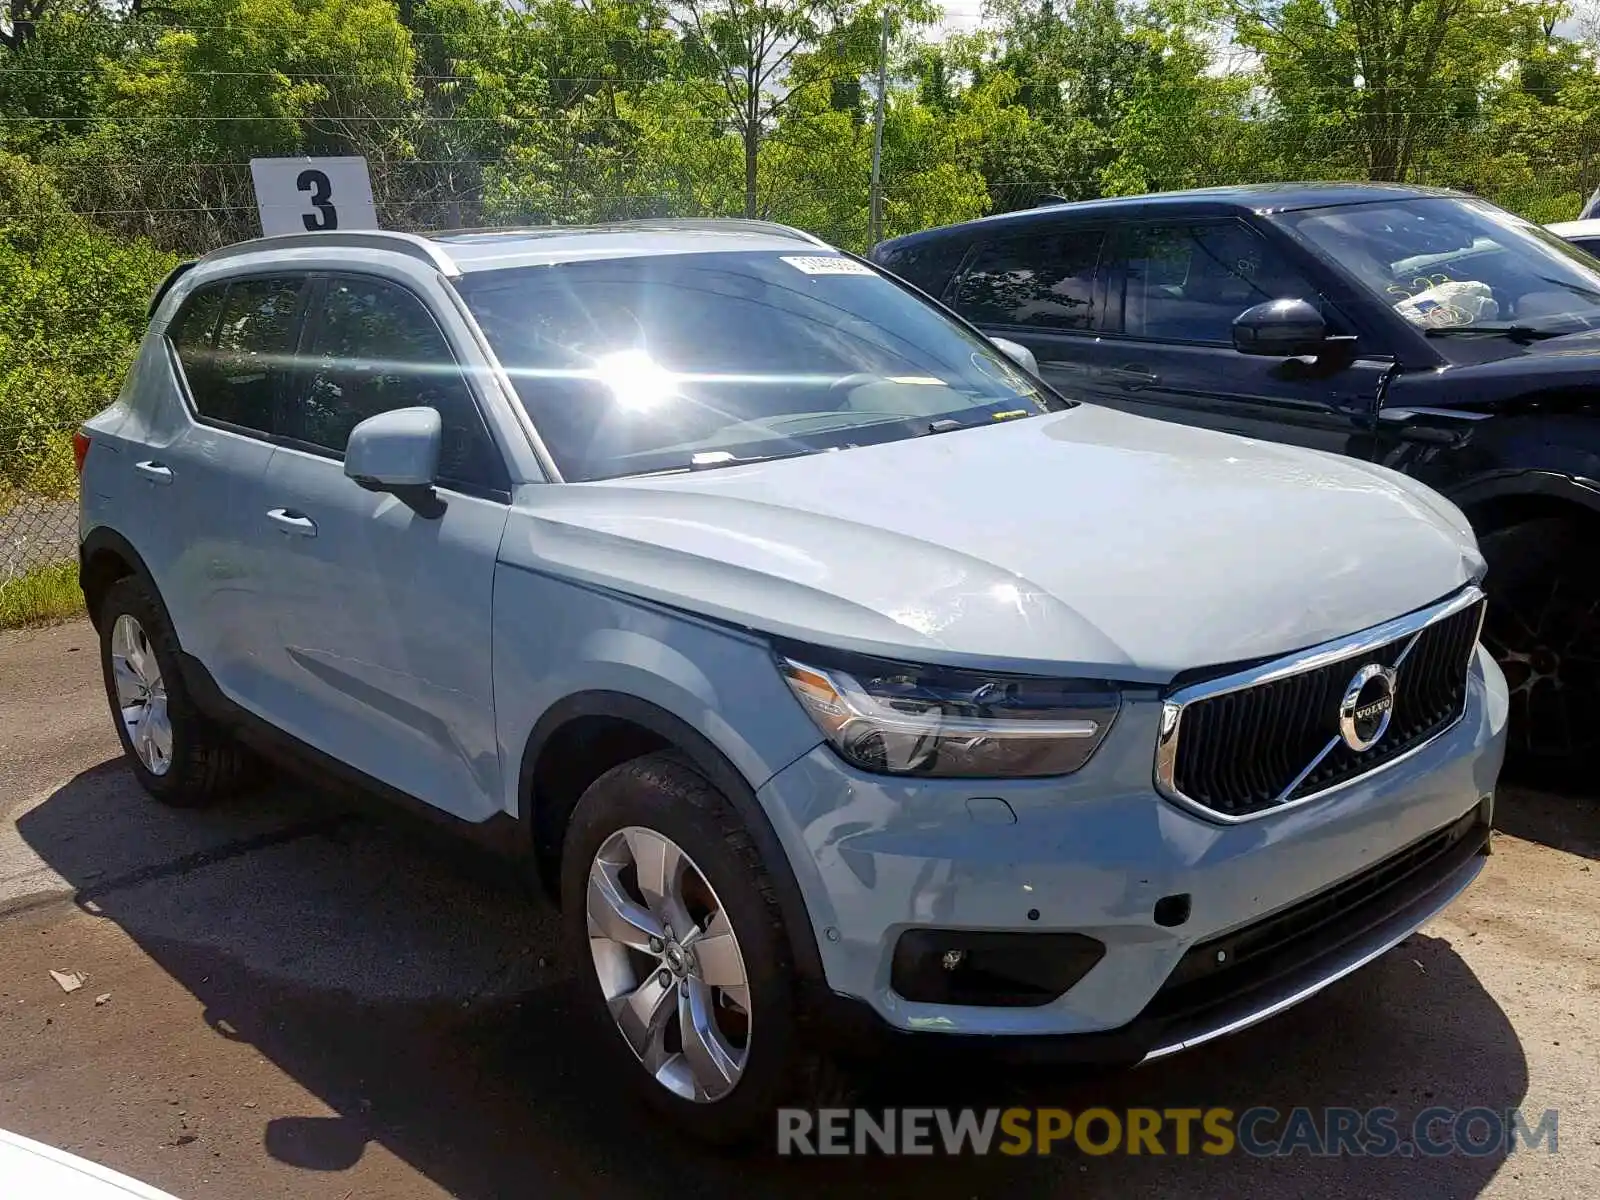 1 Photograph of a damaged car YV4162UK5K2062864 VOLVO XC40 T5 2019